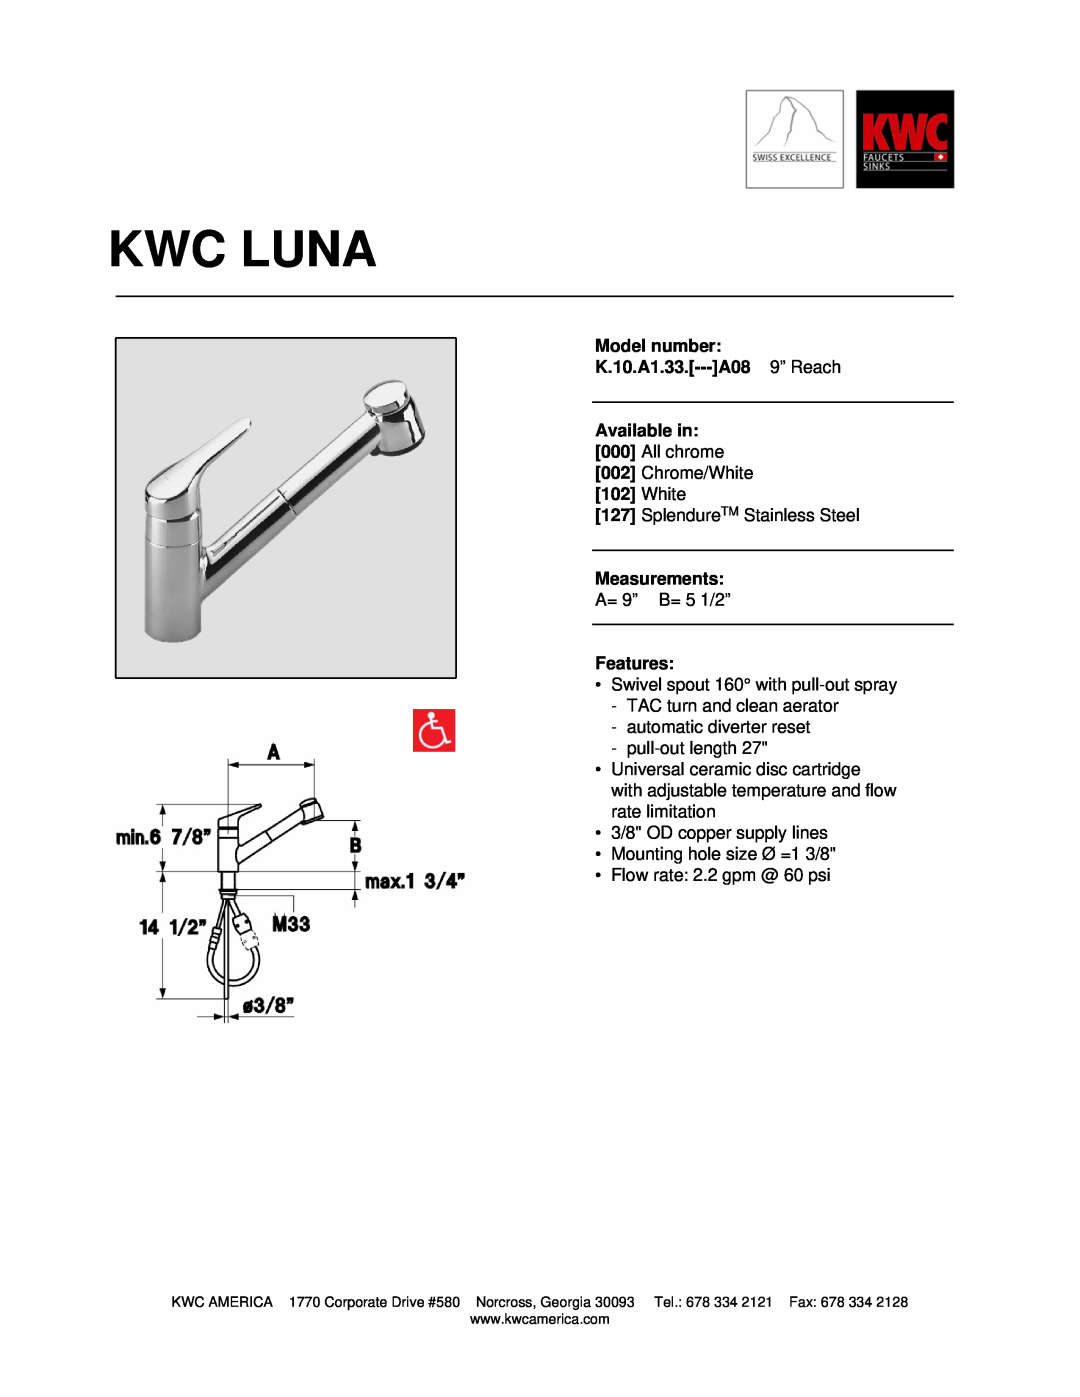 KWC manual Kwc Luna, Model number K.10.A1.33.---A08 9” Reach, Available in, White, Measurements, Features 